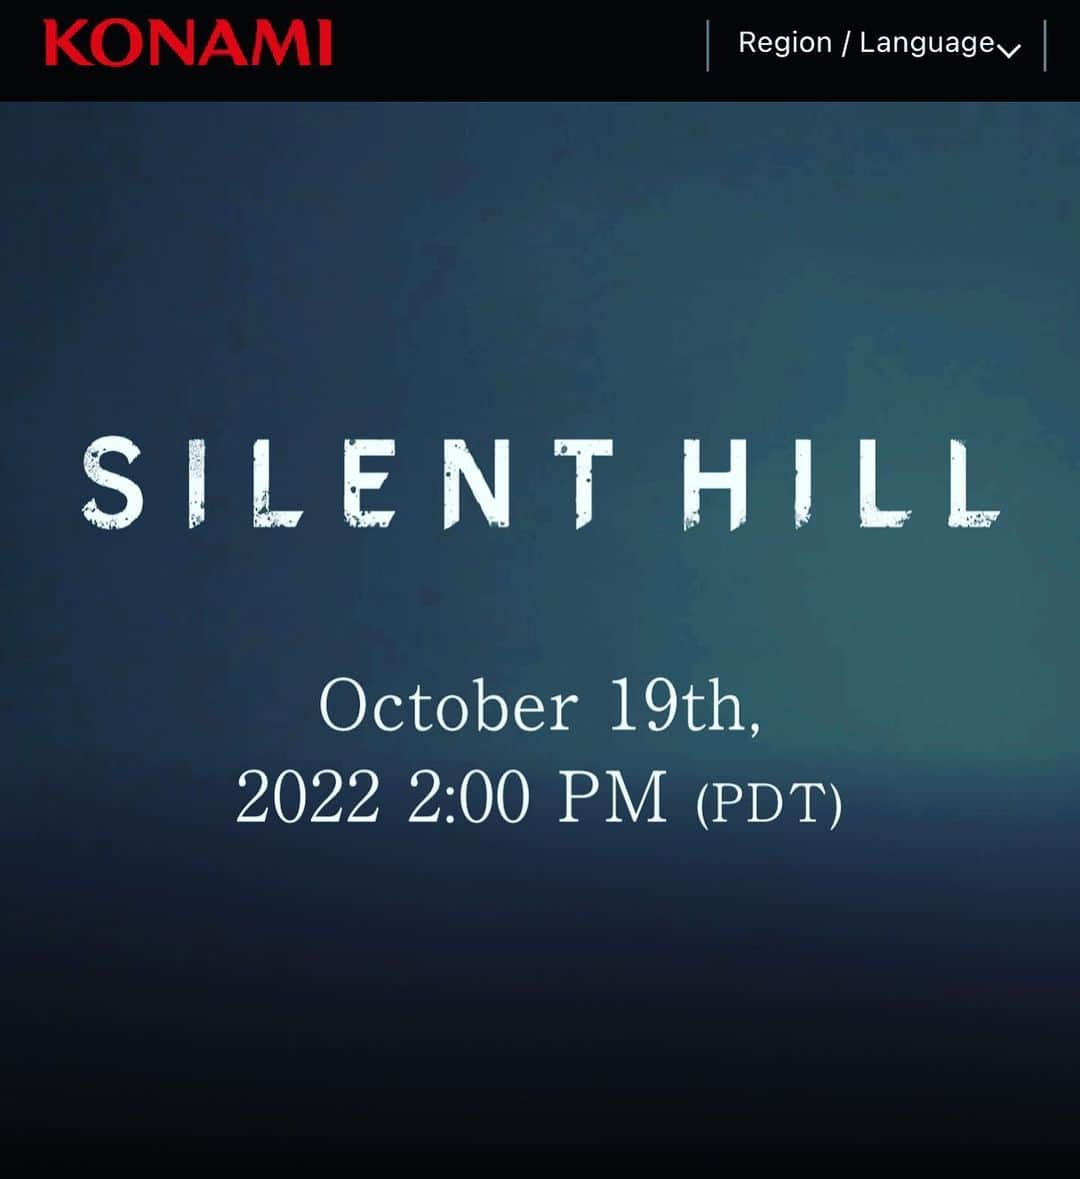 Akira Yamaokaのインスタグラム：「In your restless dreams, do you see that town?   The latest updates for the SILENT HILL series, will be revealed during the #SILENTHILL Transmission on Wednesday, October 19th, at 2:00 PM. PDT」